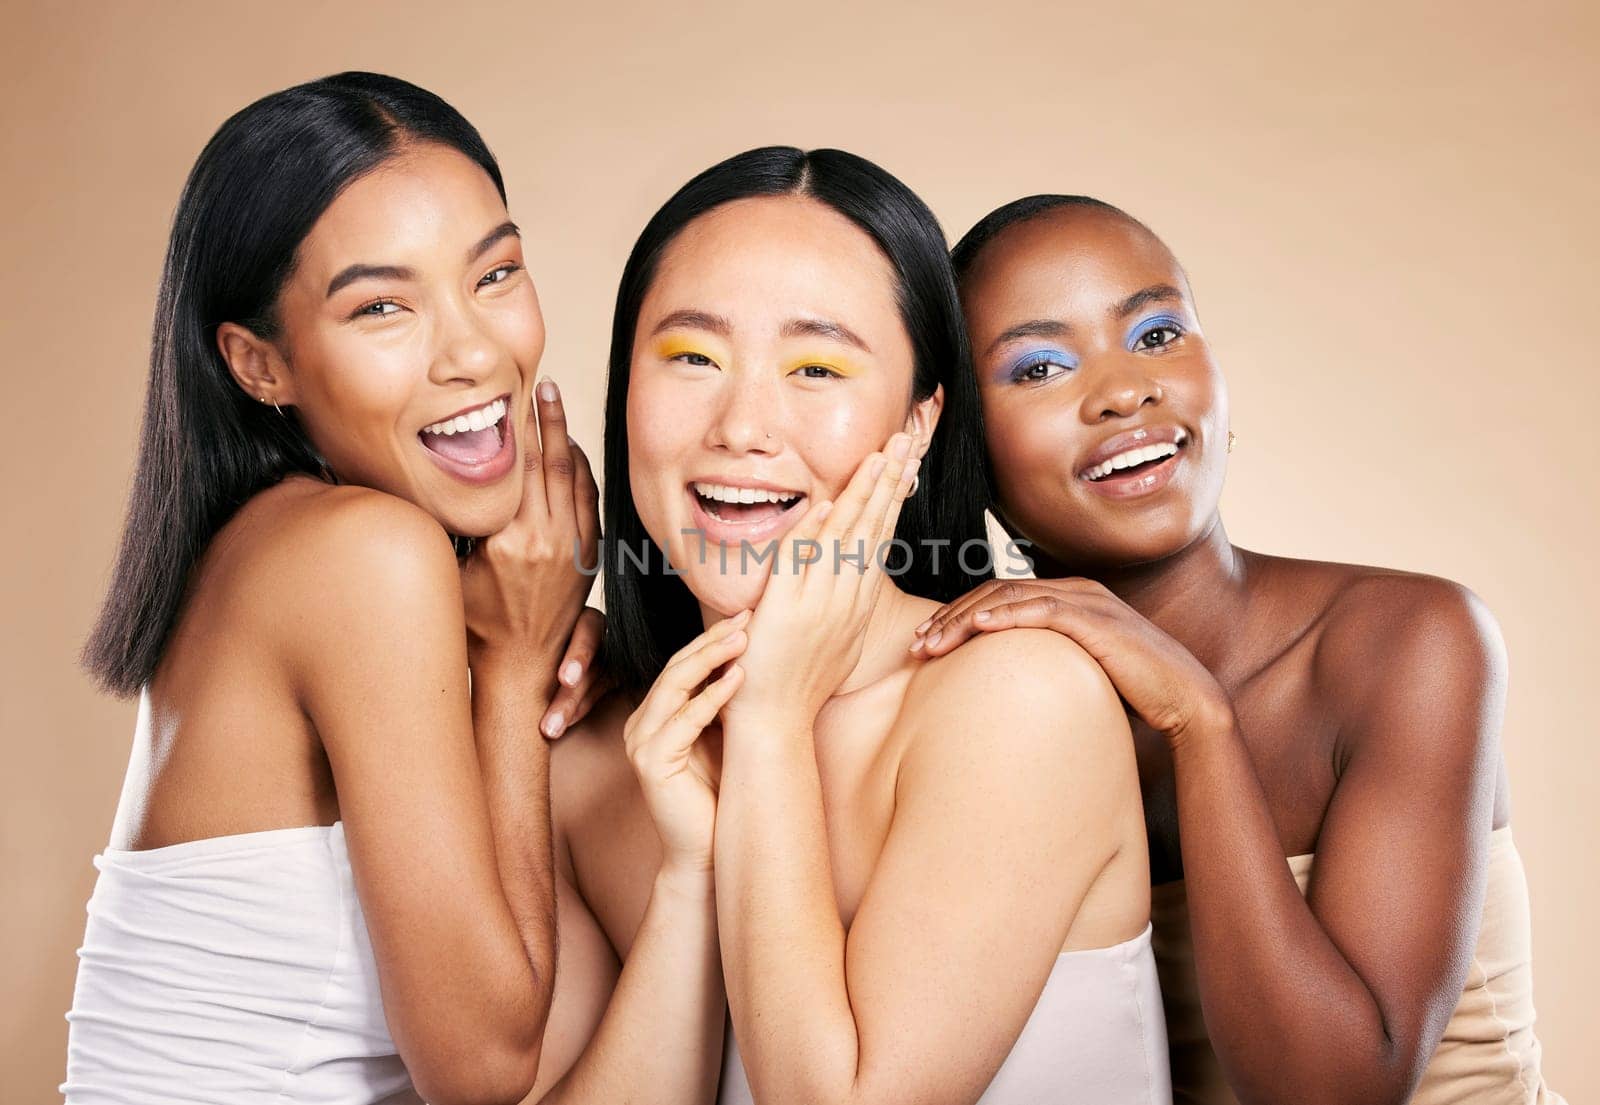 Happy women, portrait smile and diverse beauty for skincare, cosmetics or makeup against a studio background. Female friends or model face smiling in happiness for fun healthy skin treatment.